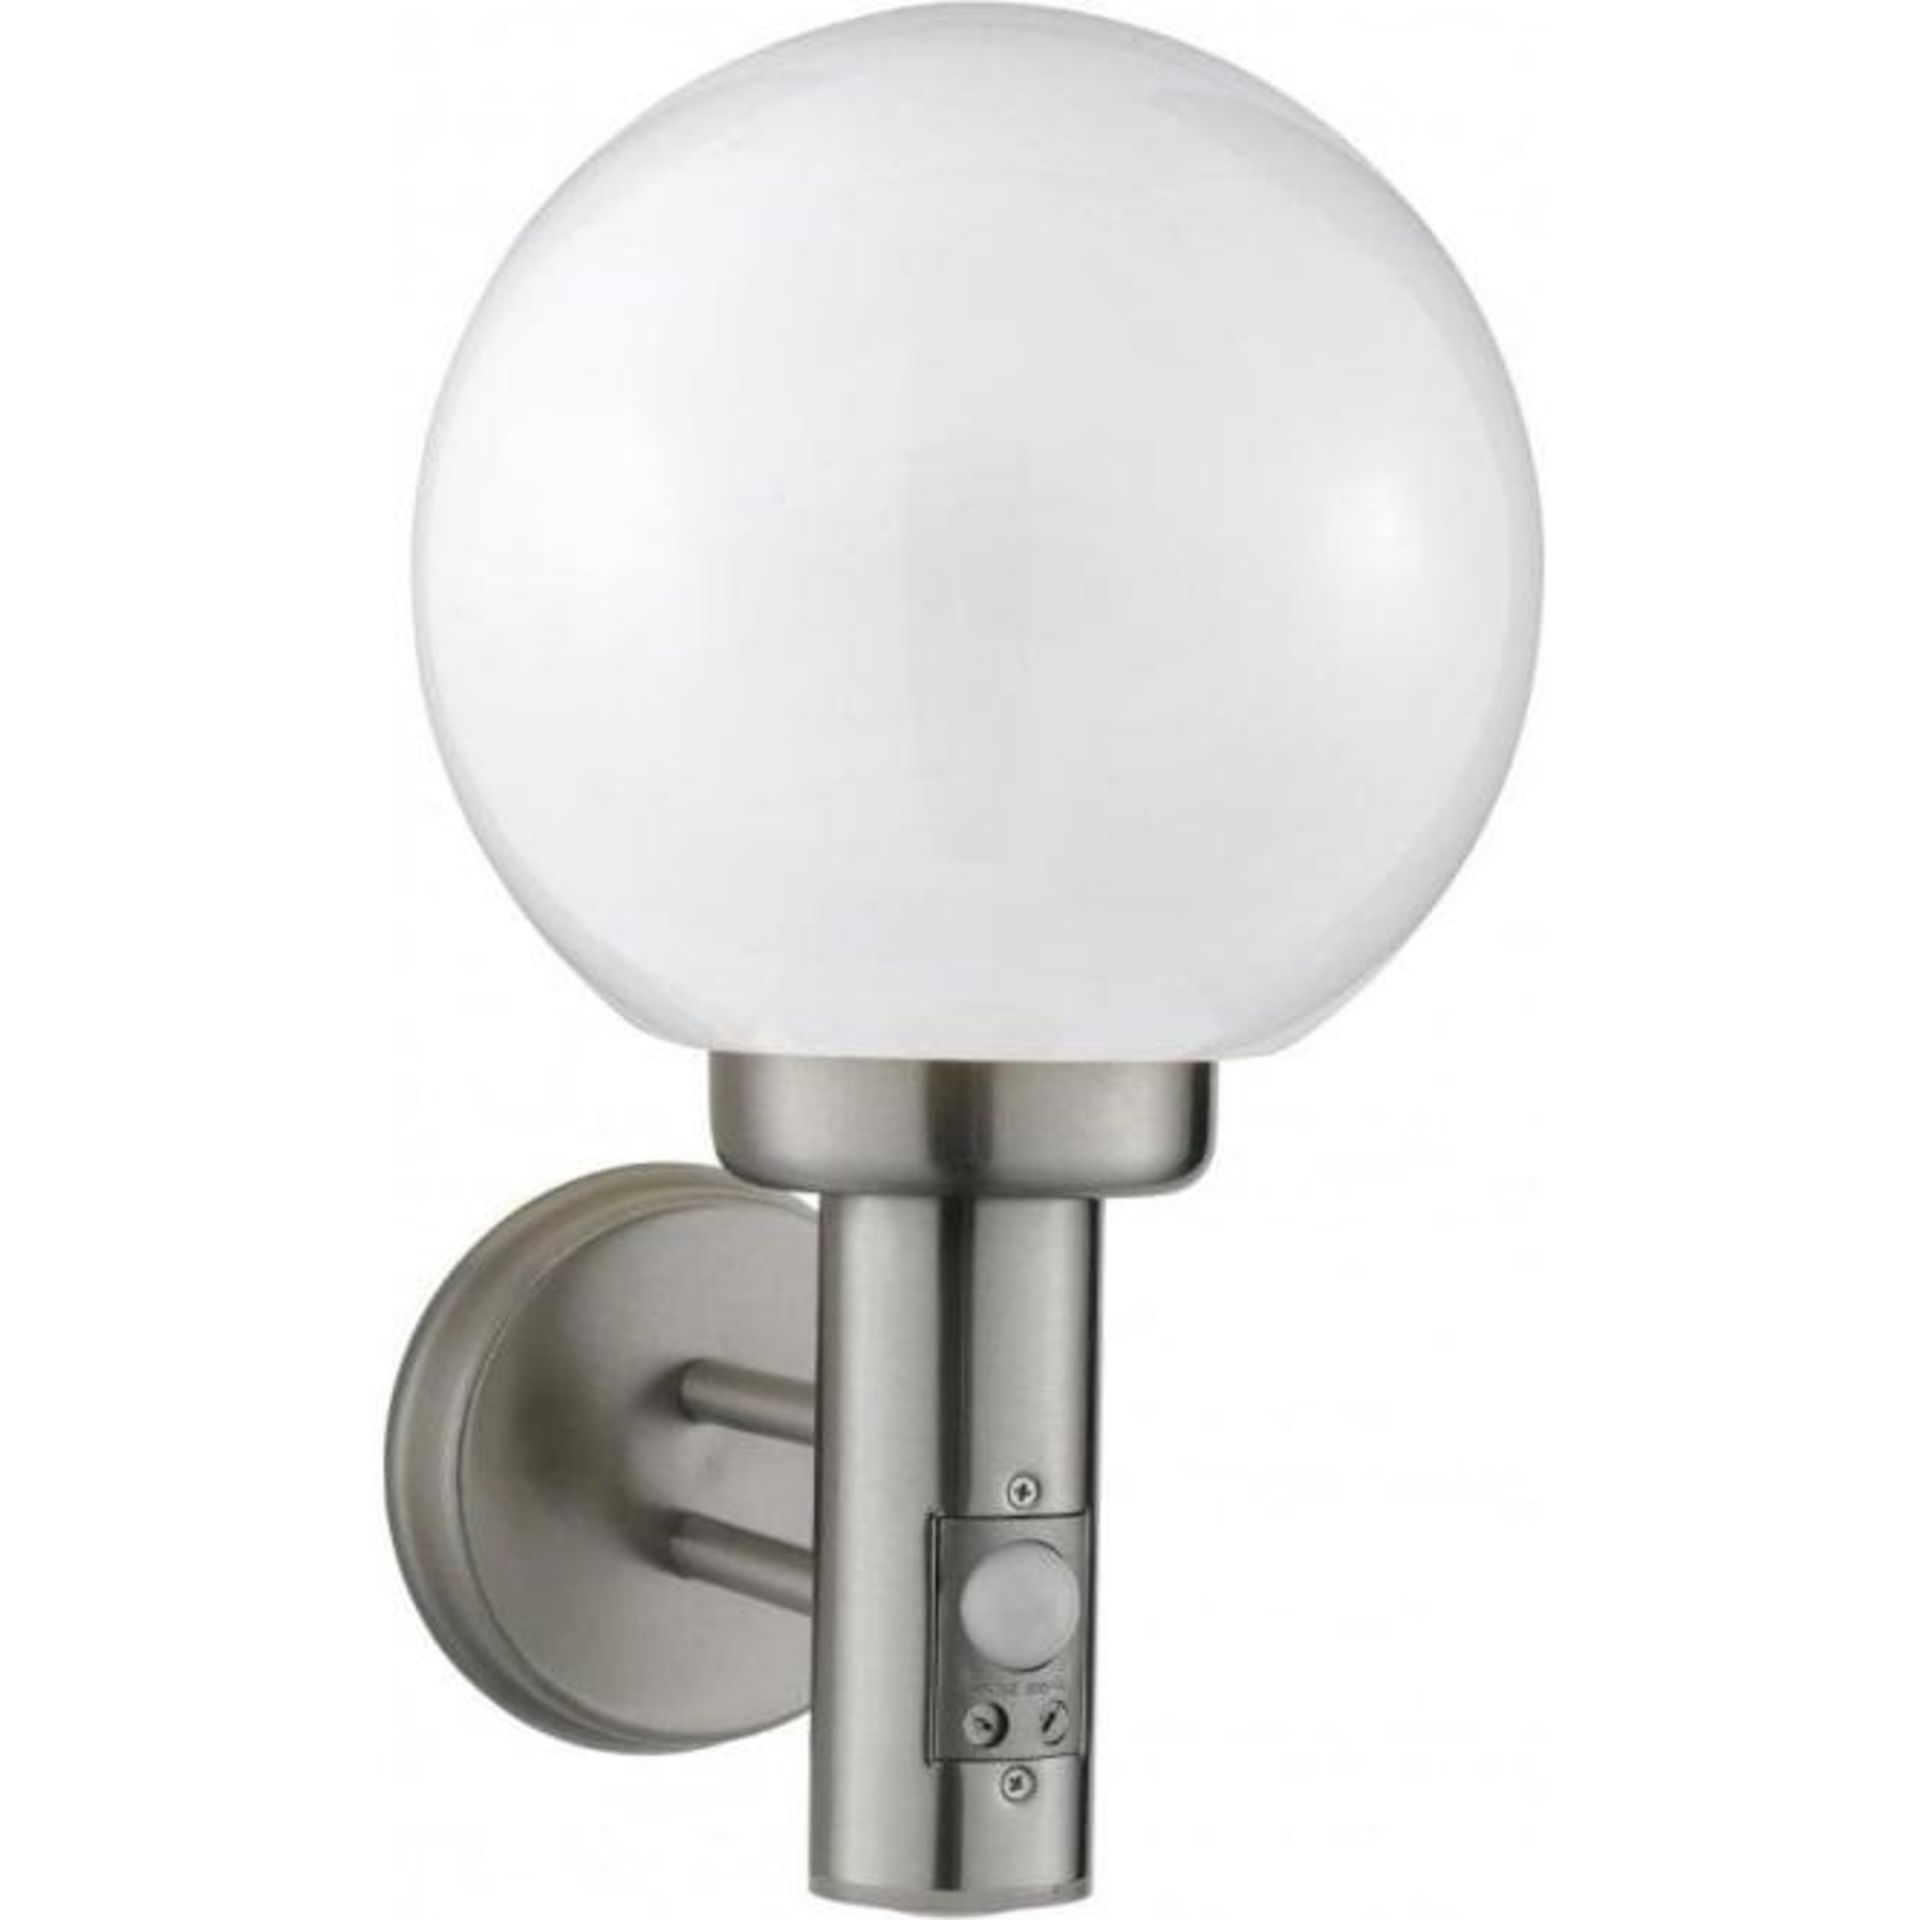 2 x Globe Outdoor Wall Light With PIR Motion Sensor - Stainless Steel With Polycarbonate Shade - IP4 - Image 2 of 5